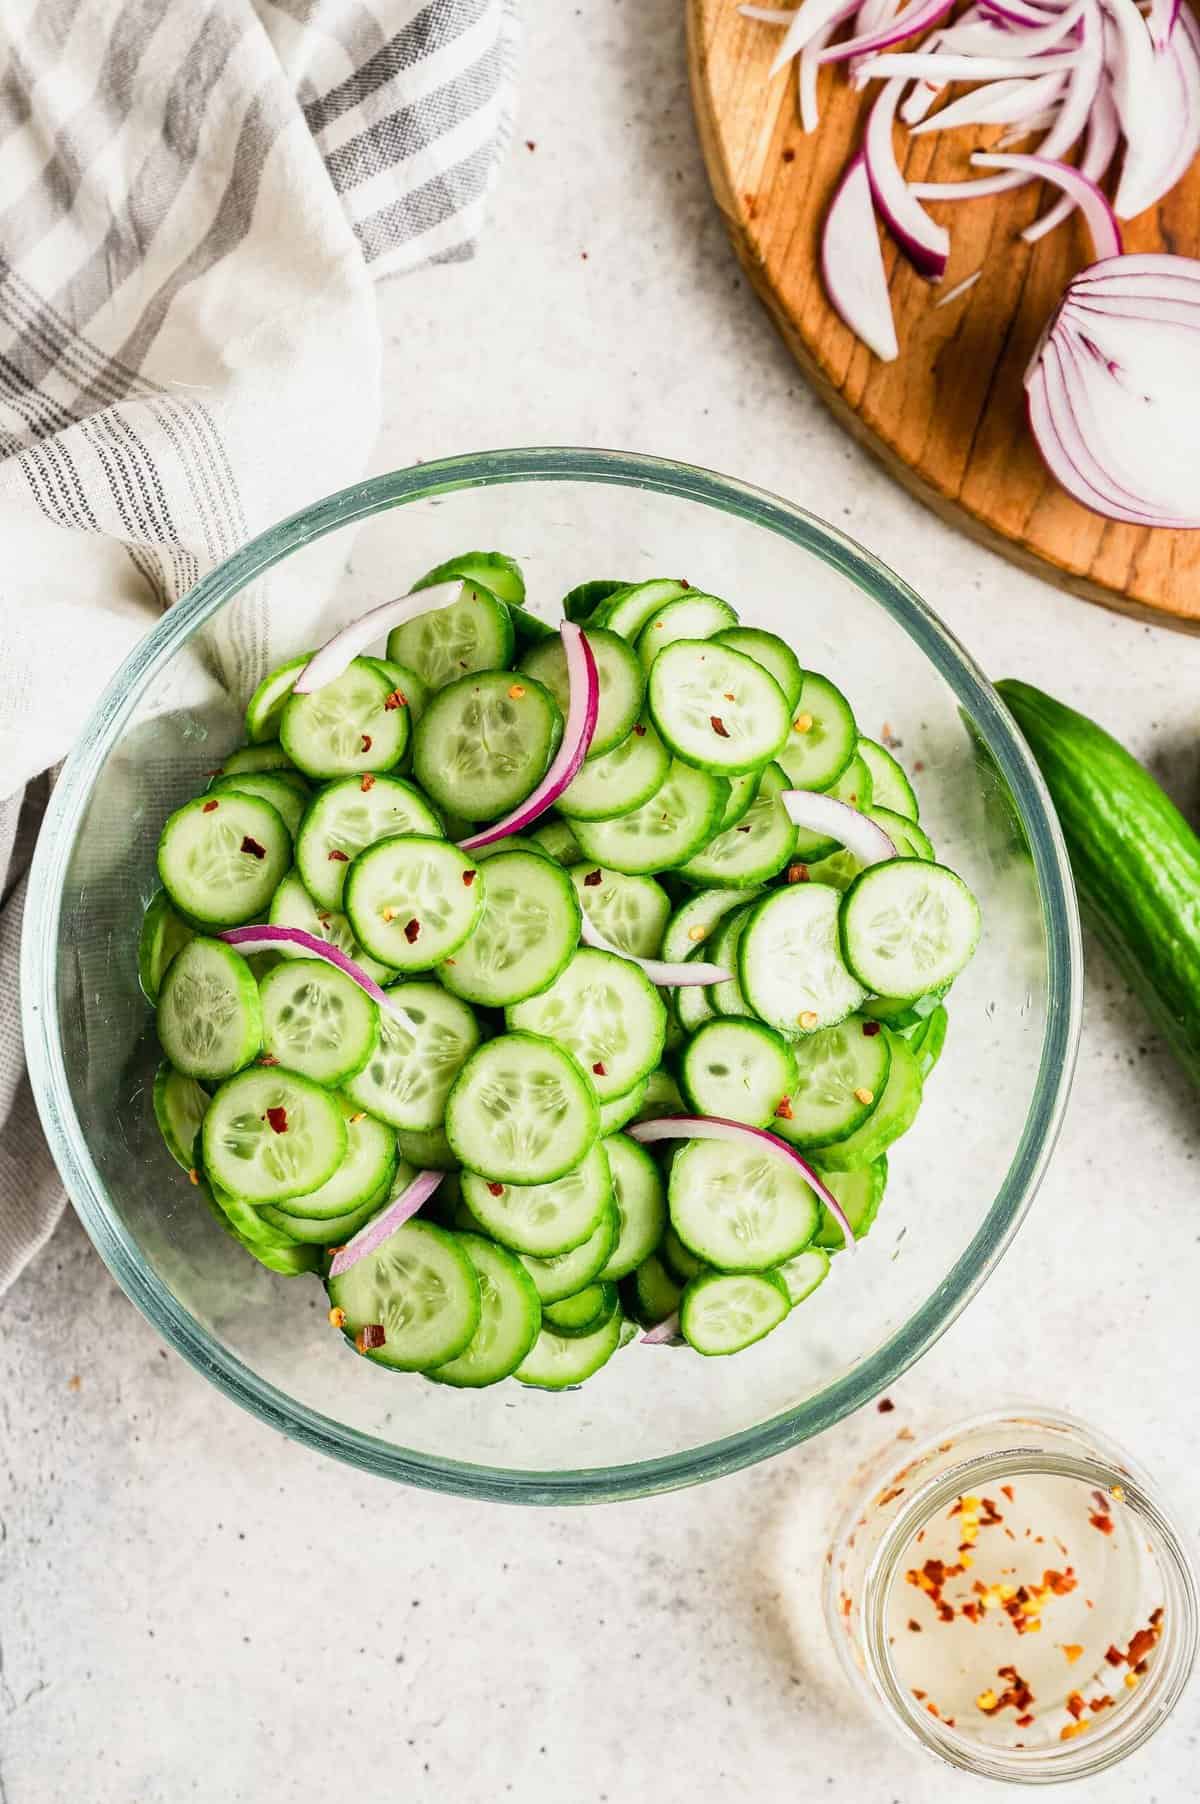 Overhead view of cucumber salad in glass bowl